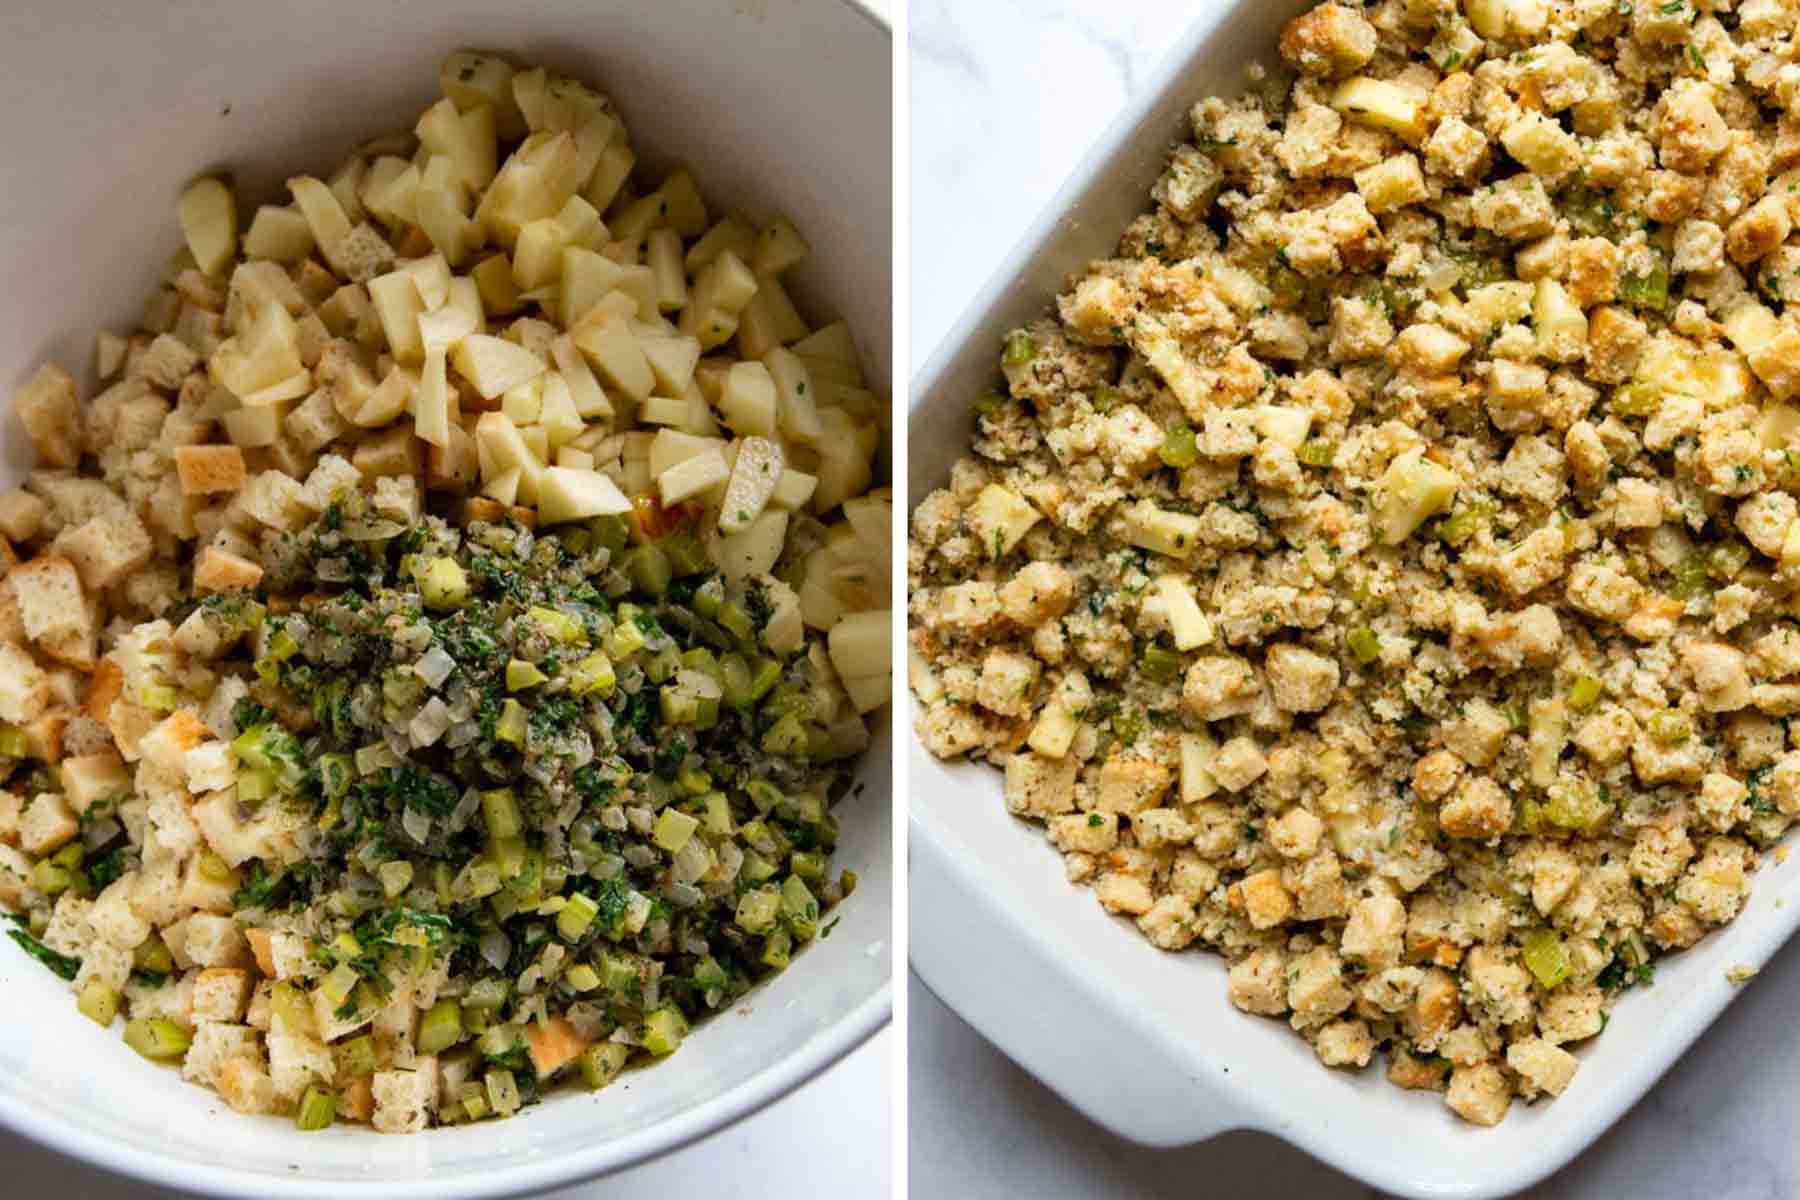 images showing how to mix together the stuffing.